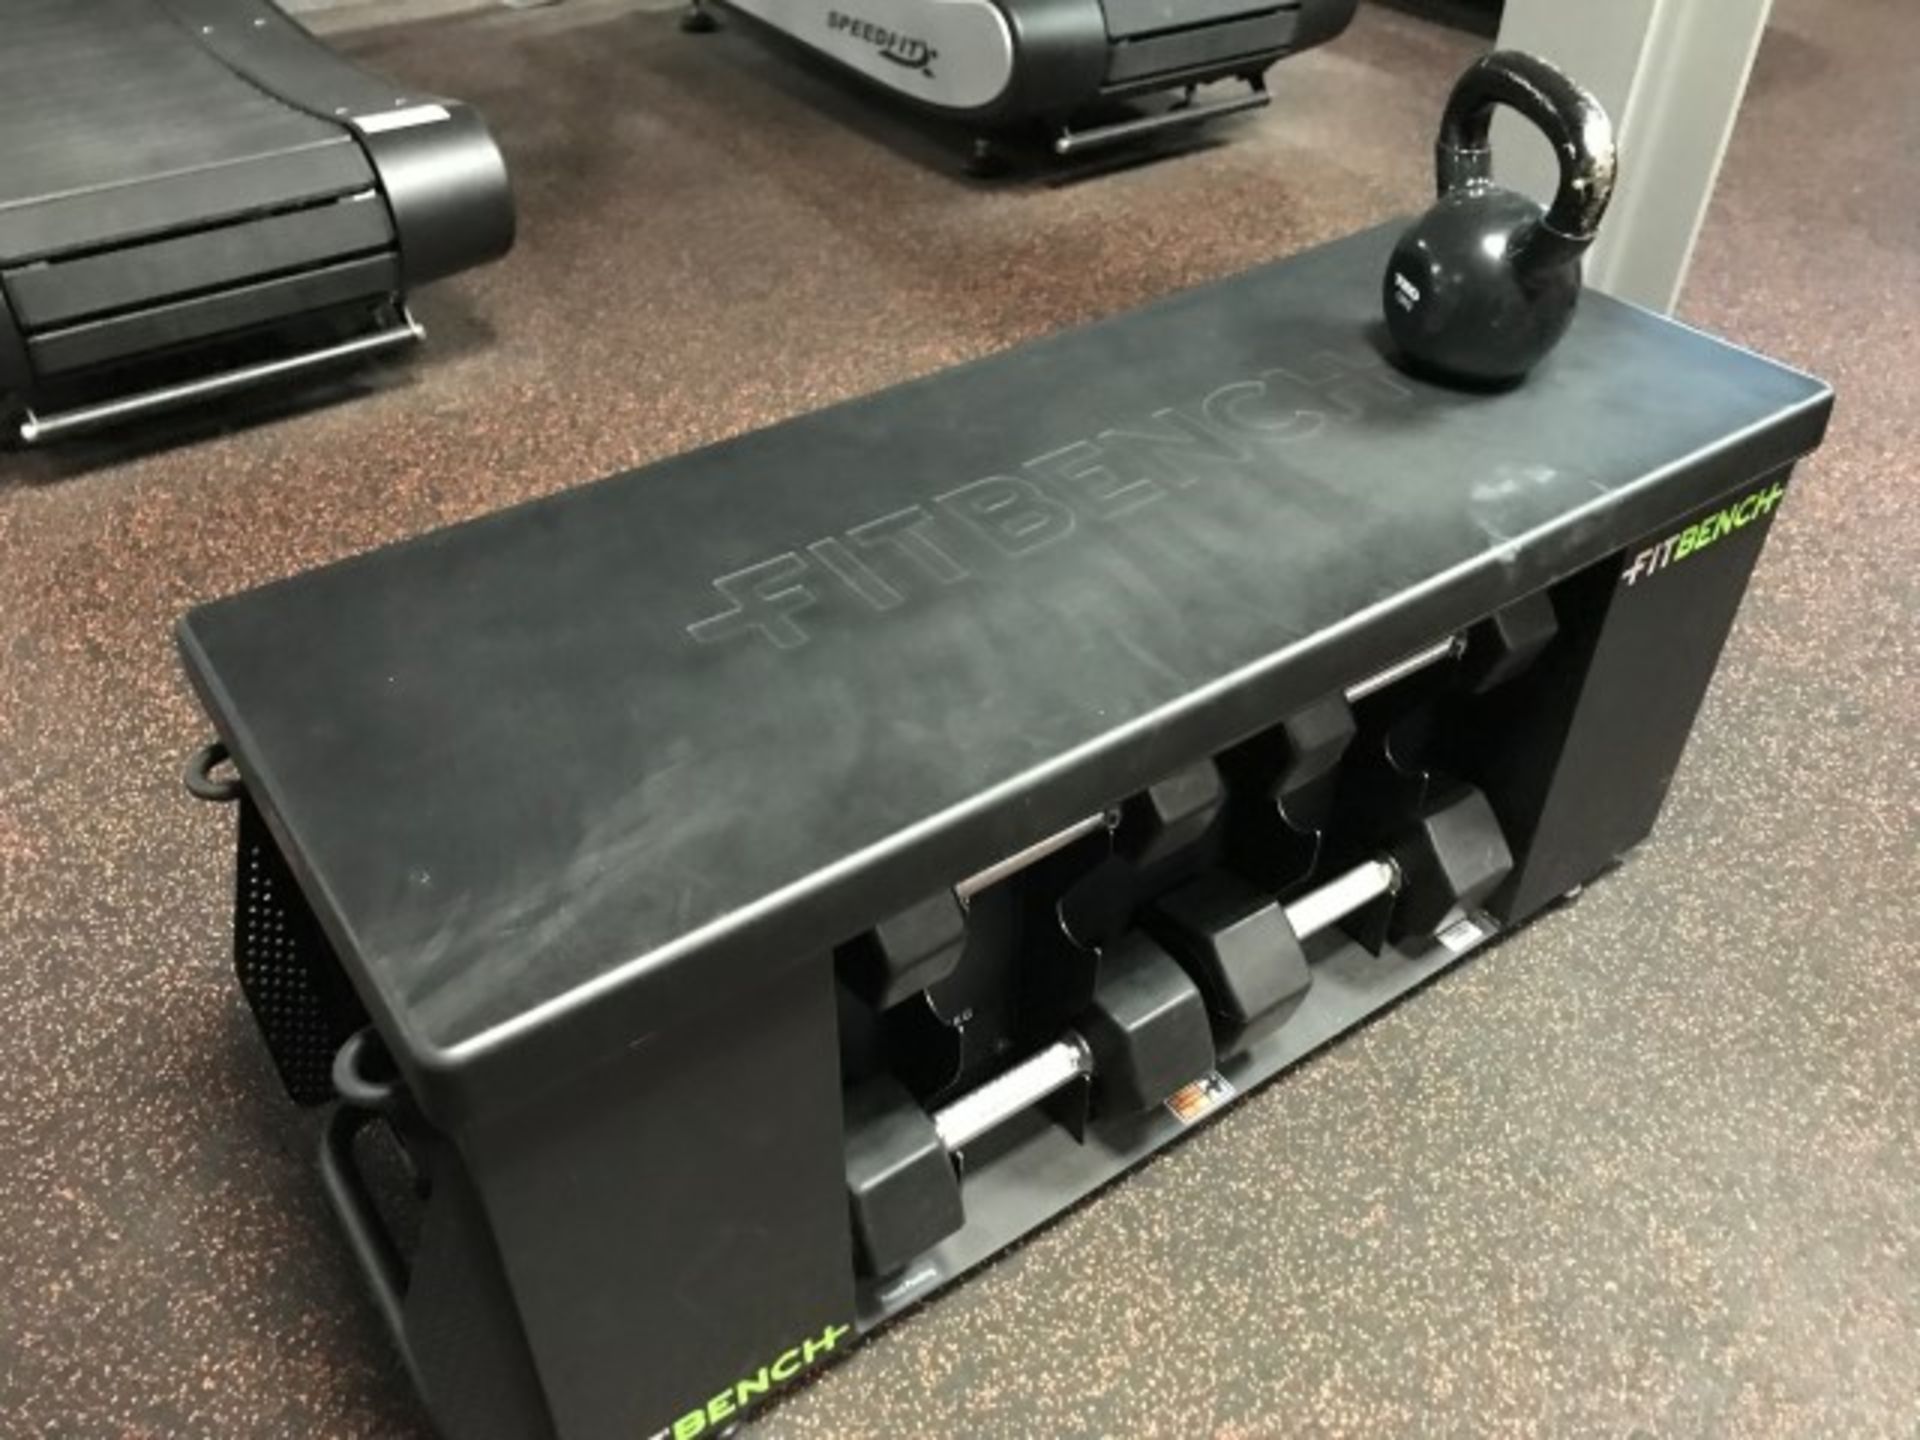 Fitbench mobile bench with free weights